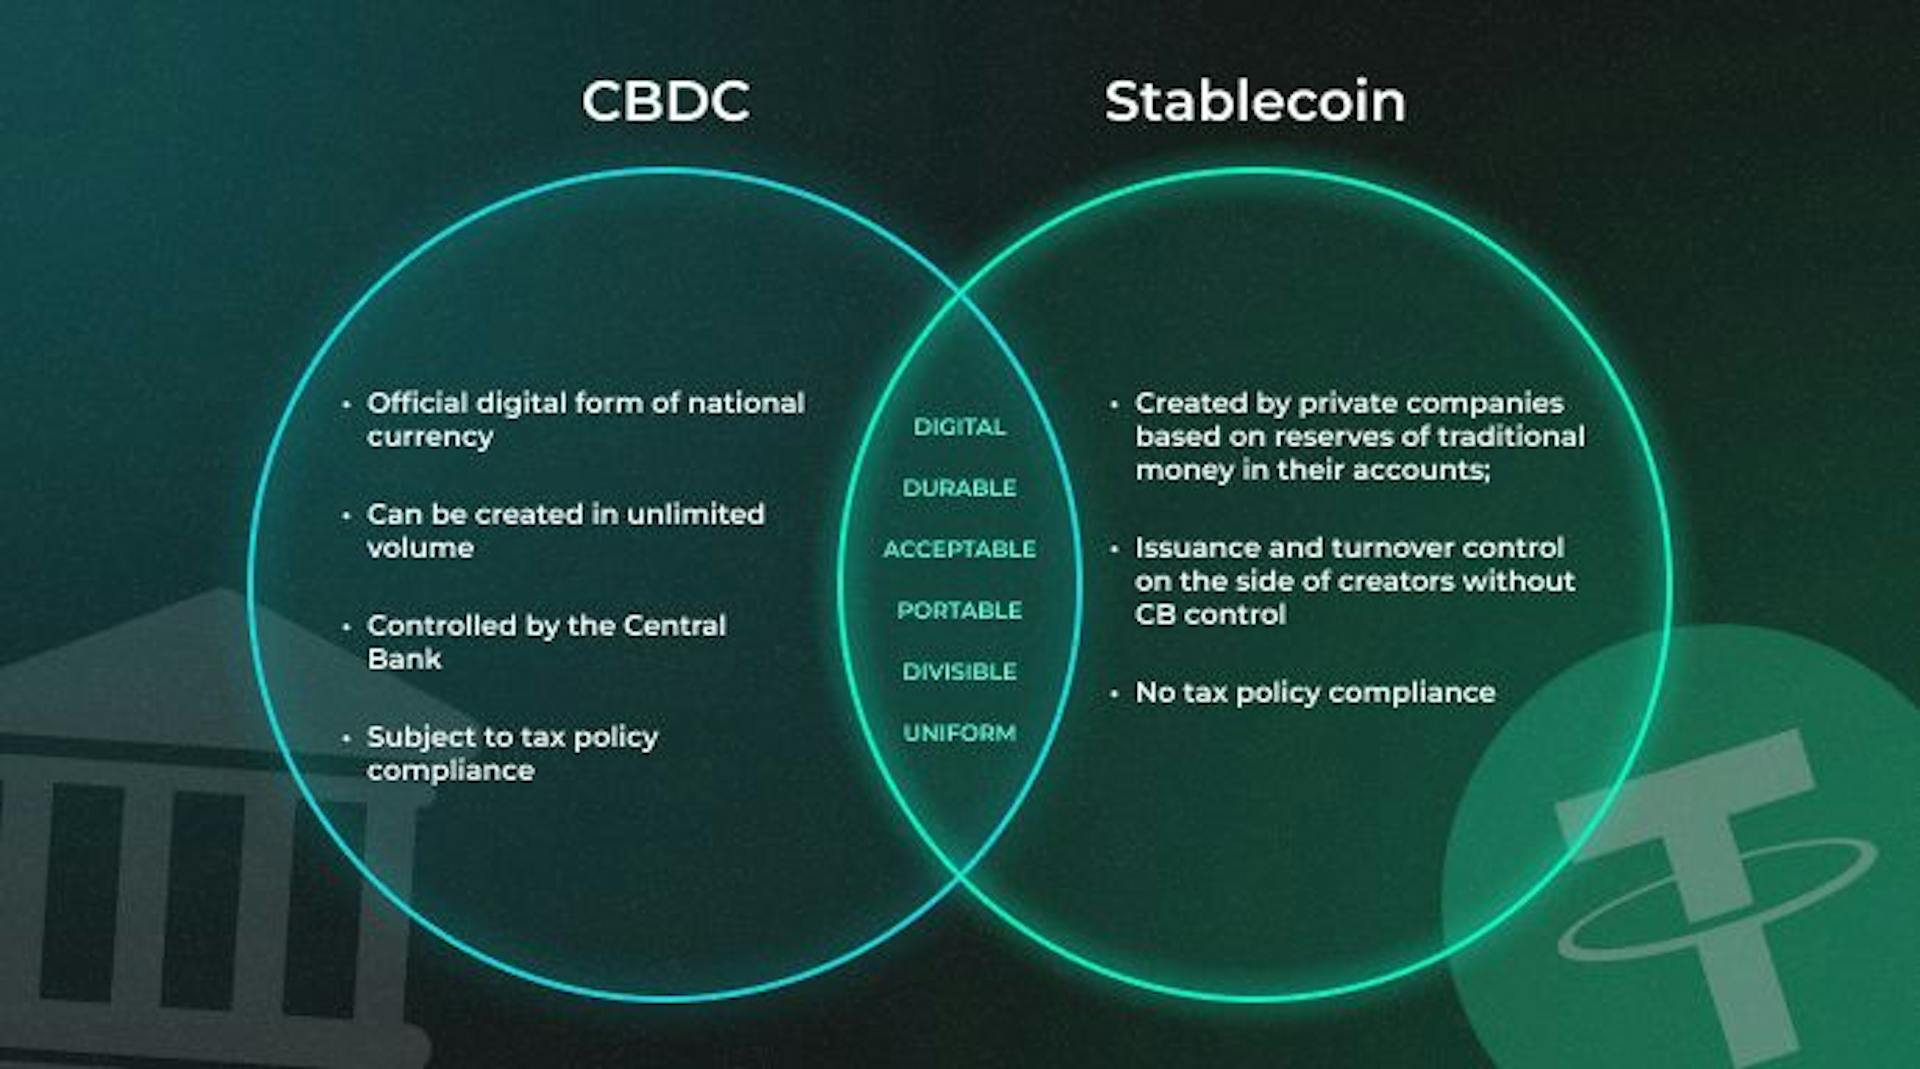 Differences between CBDCs and Stablecoins